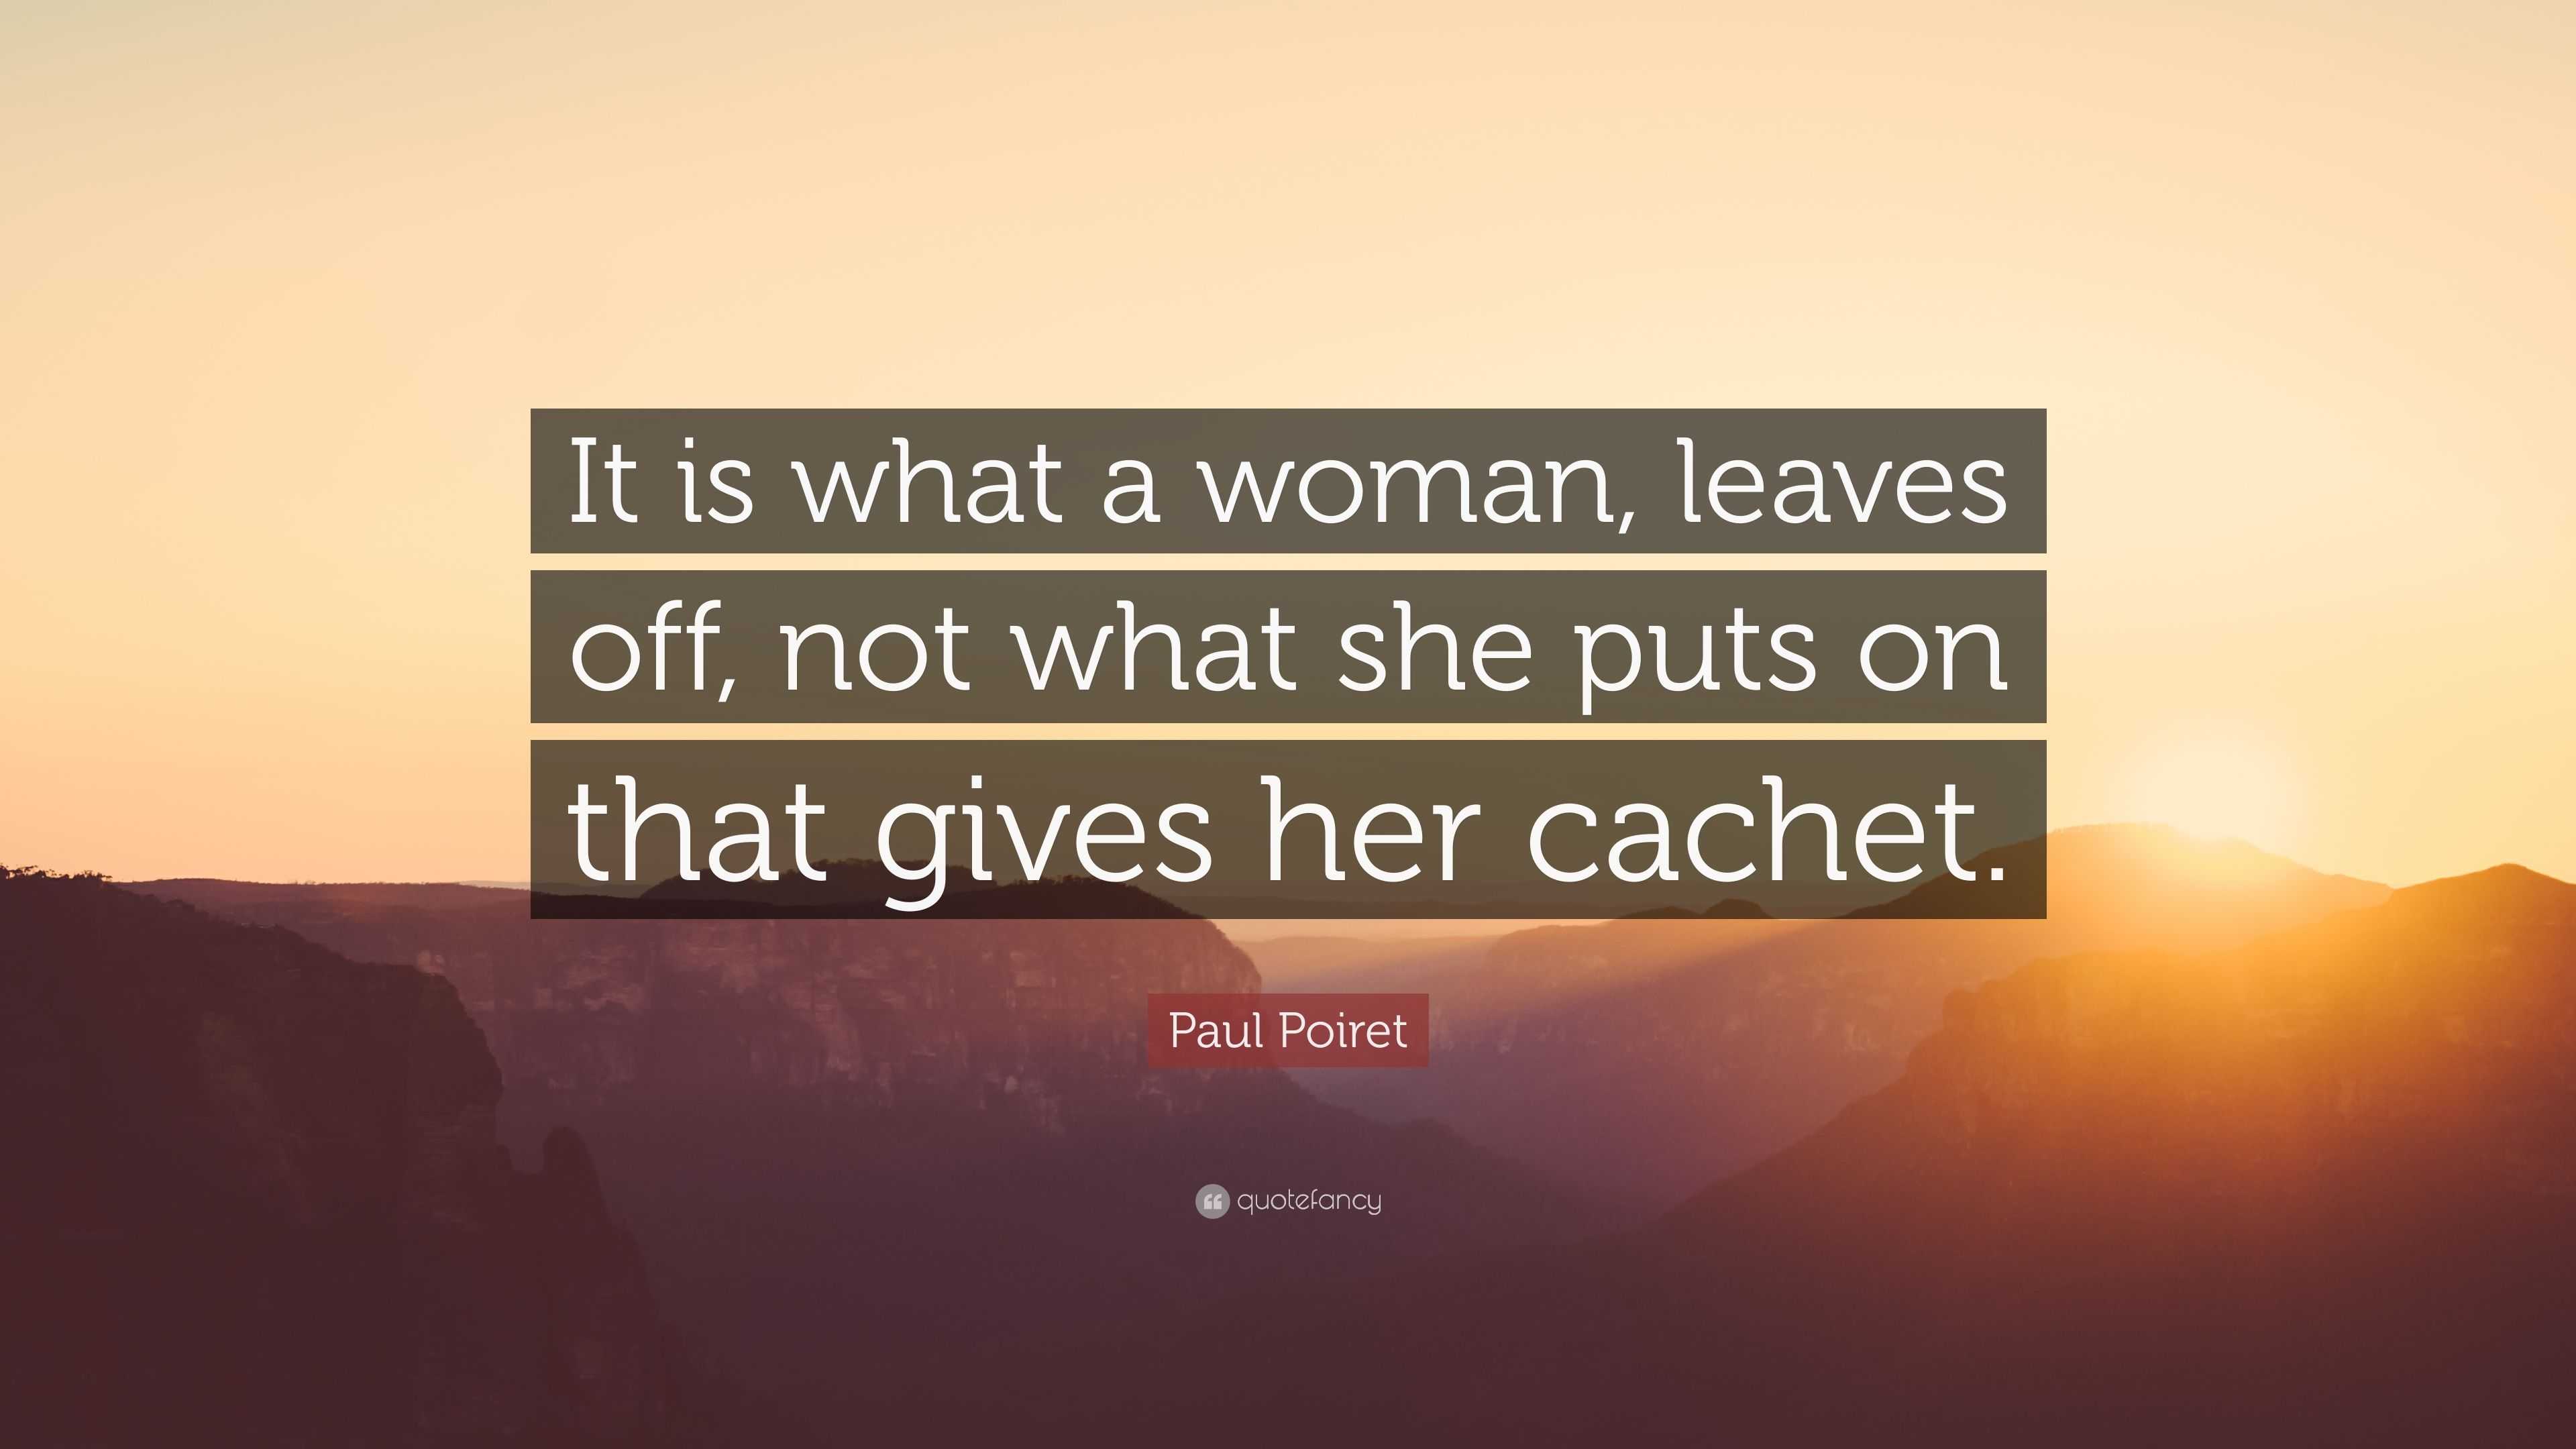 Paul Poiret Quote: “It is what a woman, leaves off, not what she puts ...